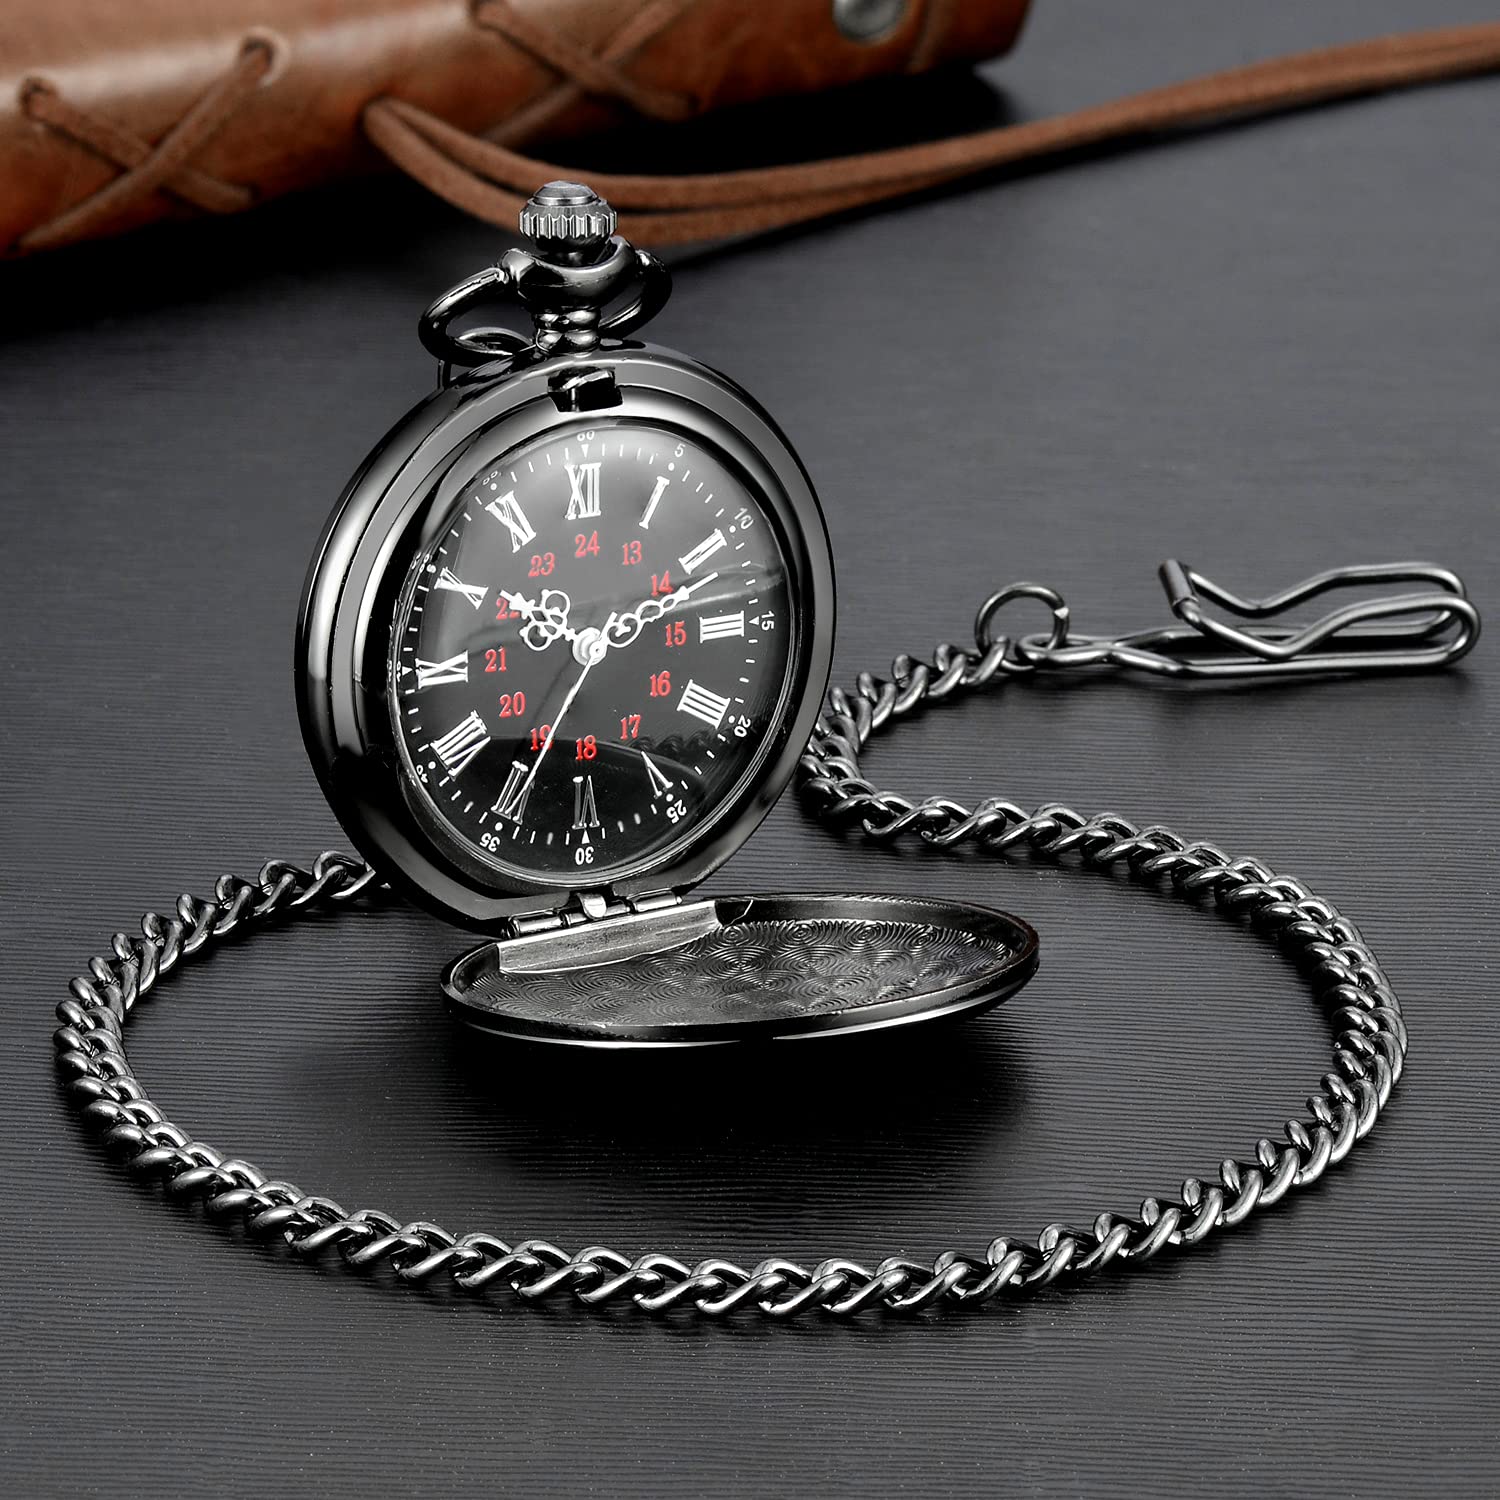 LYMFHCH Vintage Pocket Watch Roman Numerals Scale Quartz Pocket Watches with Chain Christmas Graduation Birthday Gifts Fathers Day